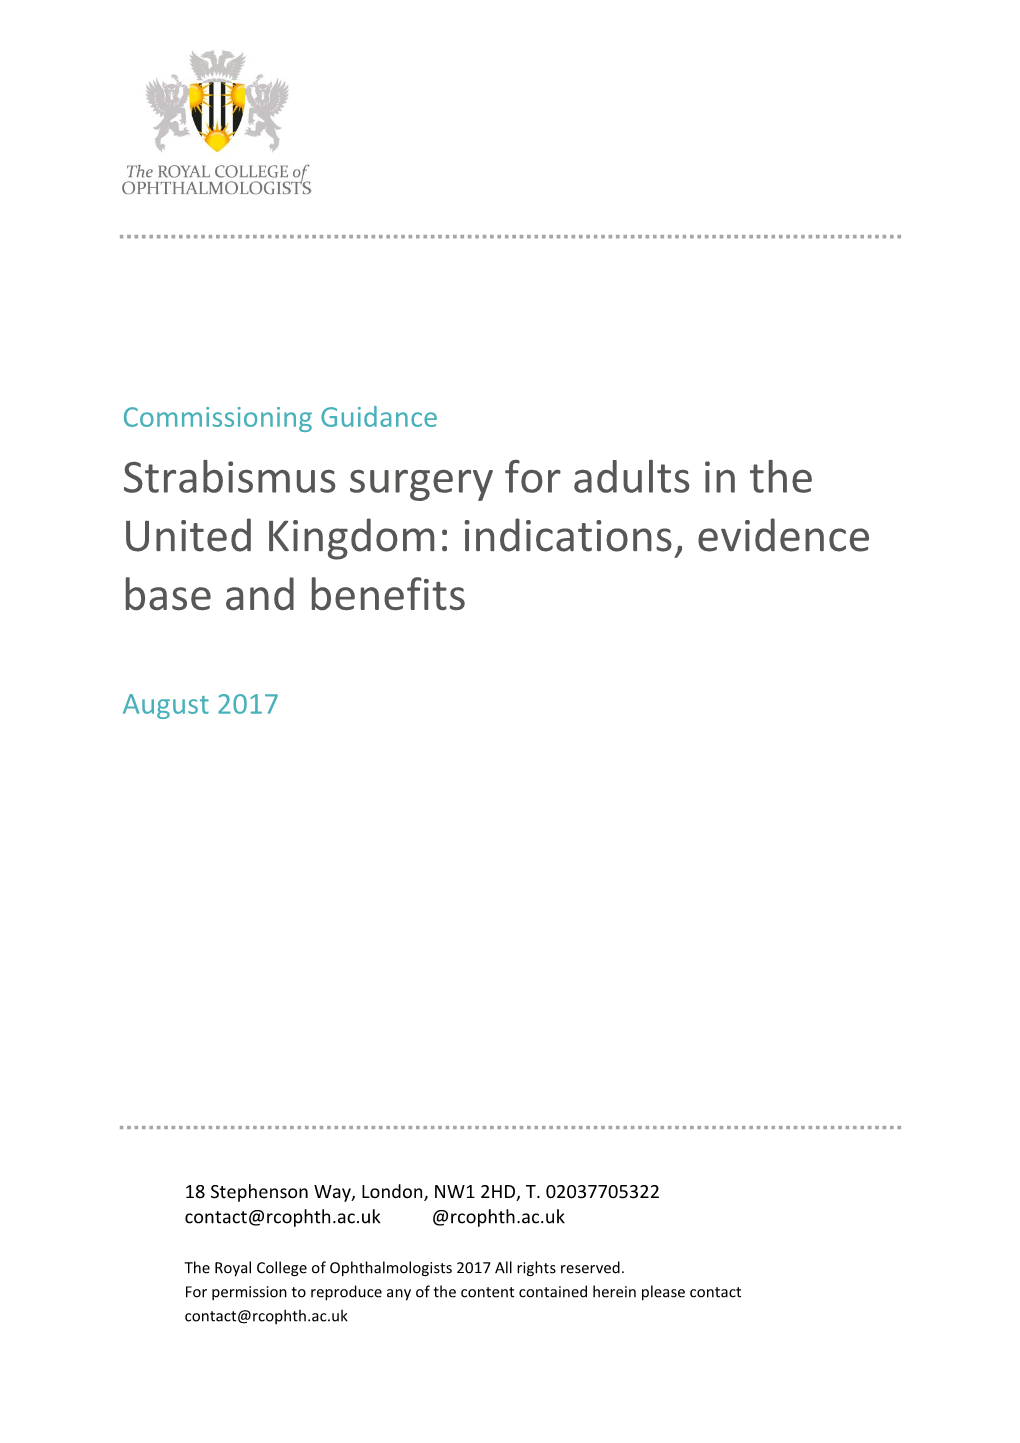 Strabismus Surgery for Adults in the United Kingdom: Indications, Evidence Base and Benefits